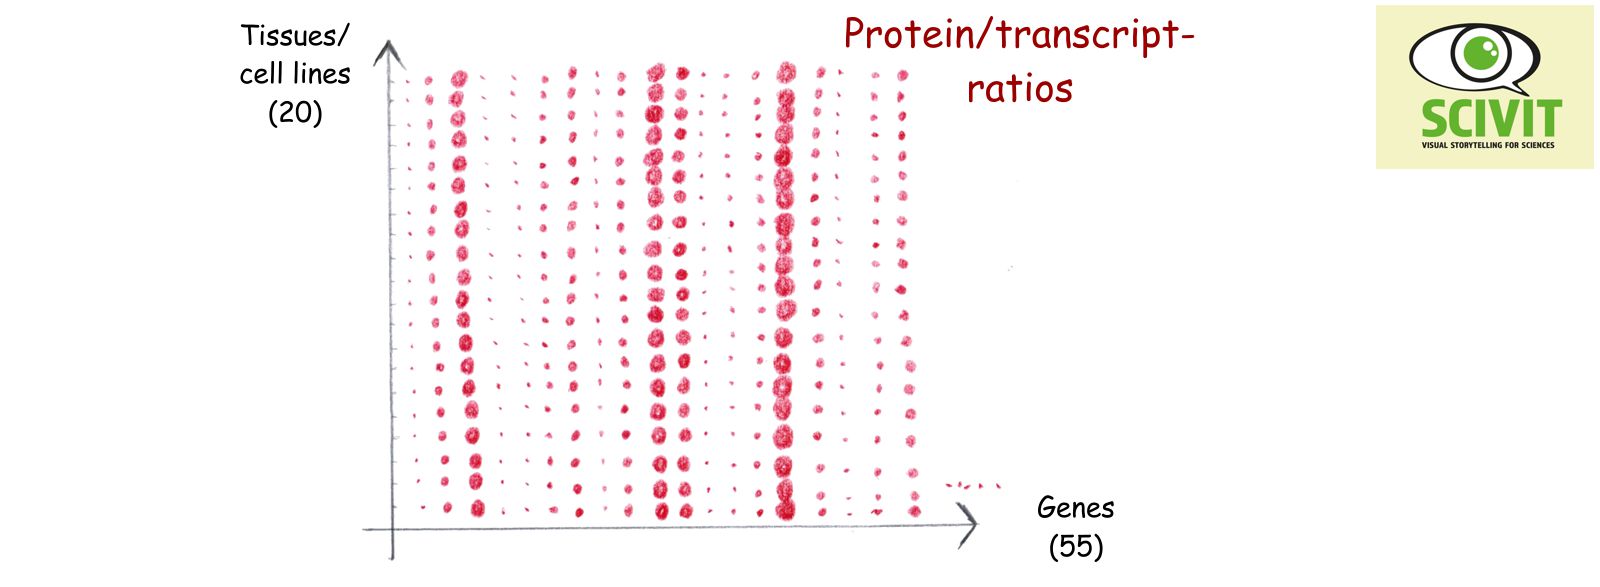 Protein levels can be deduced from transcript levels